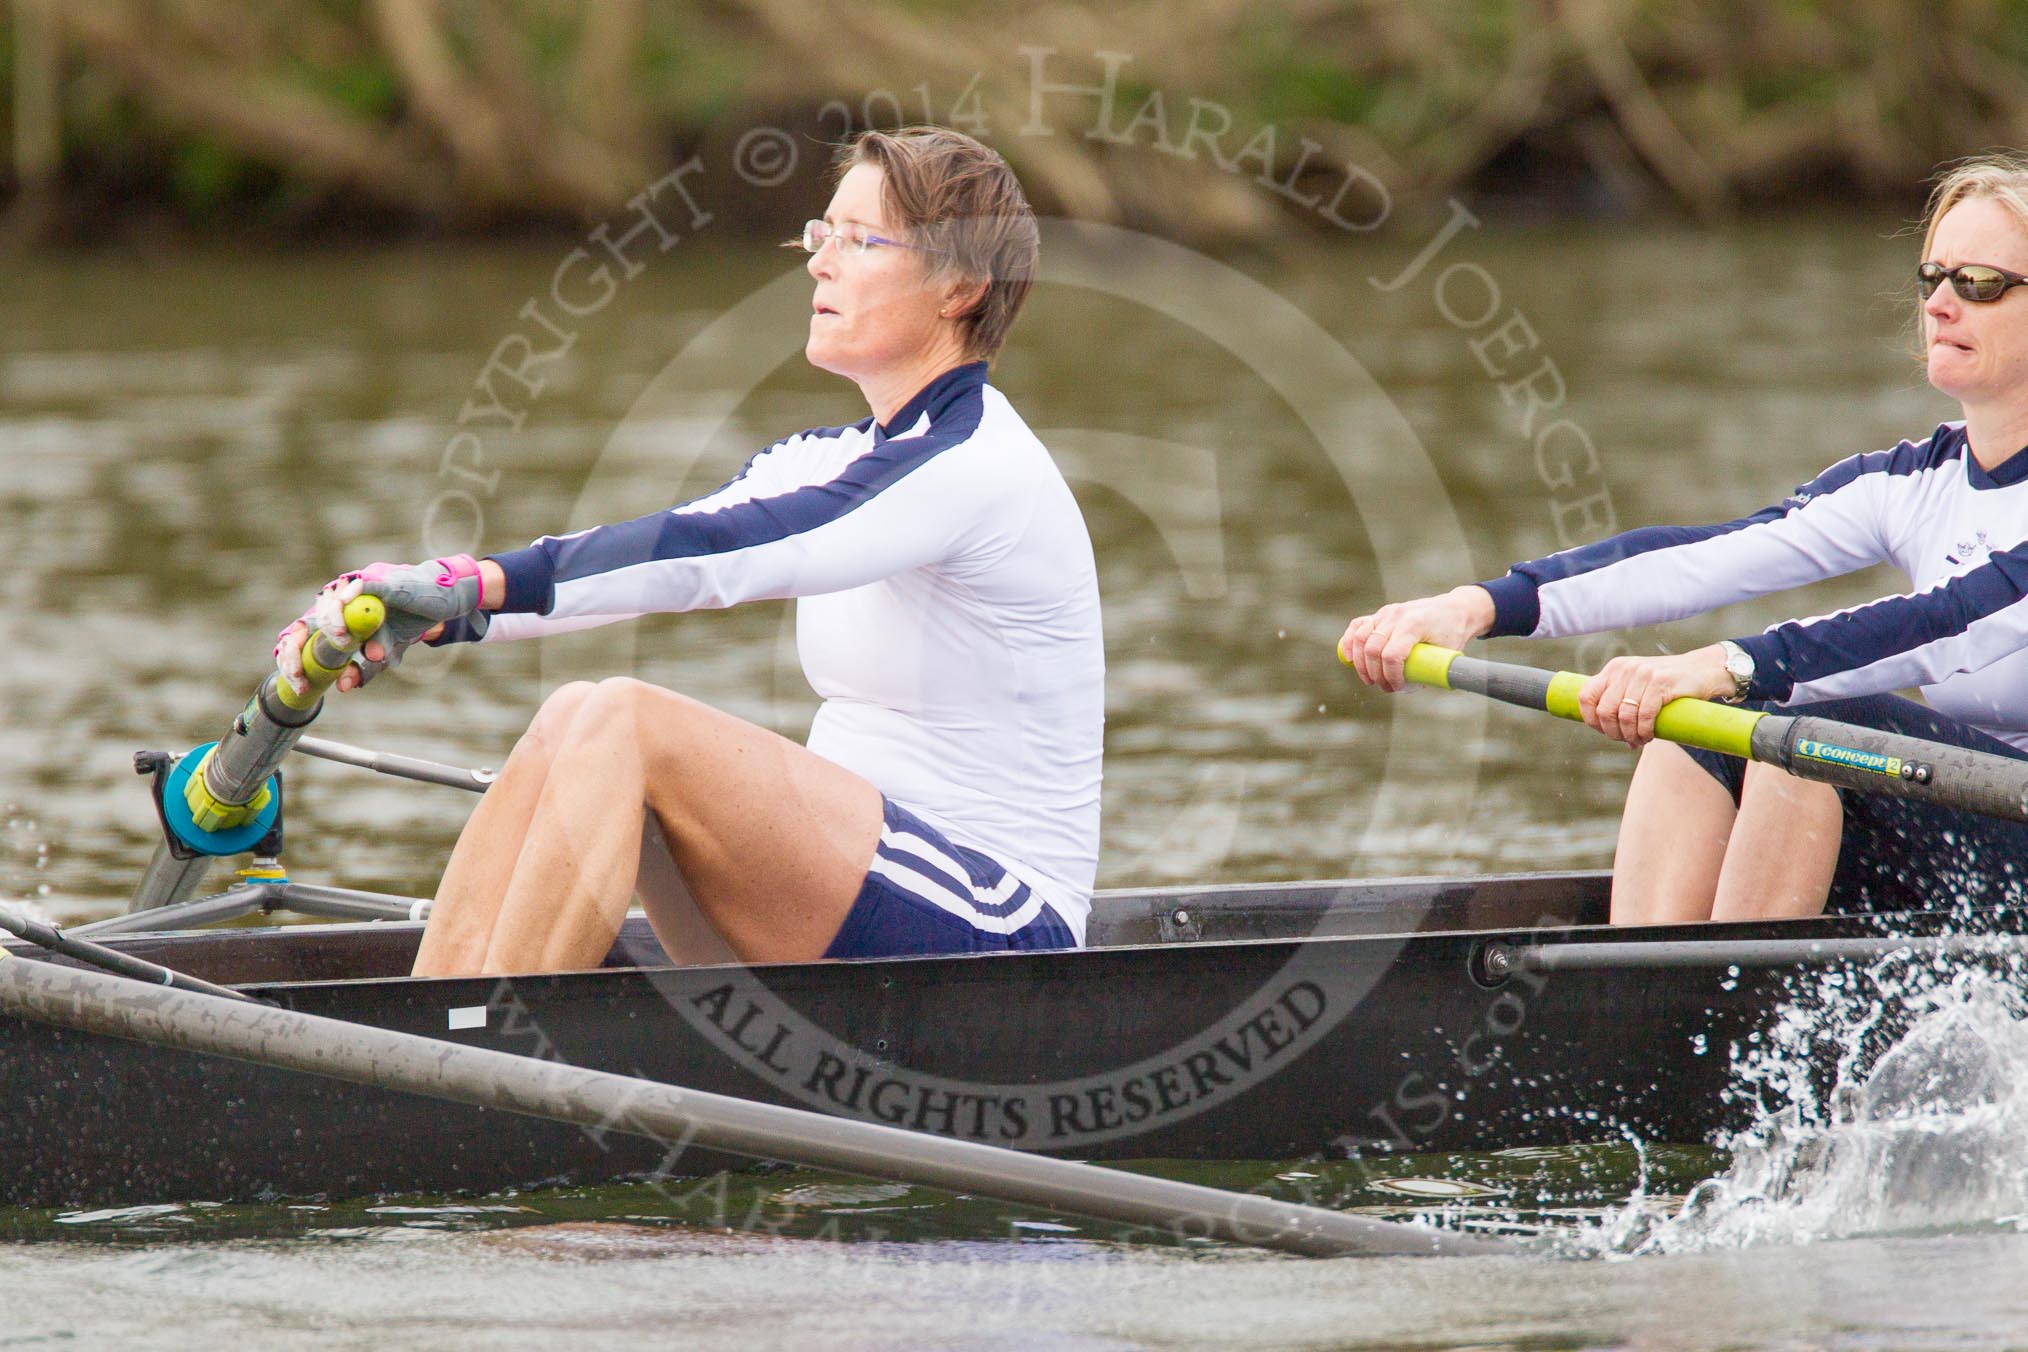 The Women's Boat Race and Henley Boat Races 2014: The Commemorative Row Past of the 1984 inaugural crews of the Oxford and Cambridge Women’s Lightweight races, to celebrate 30 years at Henley: In the OUWBC boat 4 seat Emma Kelly (Platt), 3 Laura Evison (Oldfield)..
River Thames,
Henley-on-Thames,
Buckinghamshire,
United Kingdom,
on 30 March 2014 at 15:55, image #449